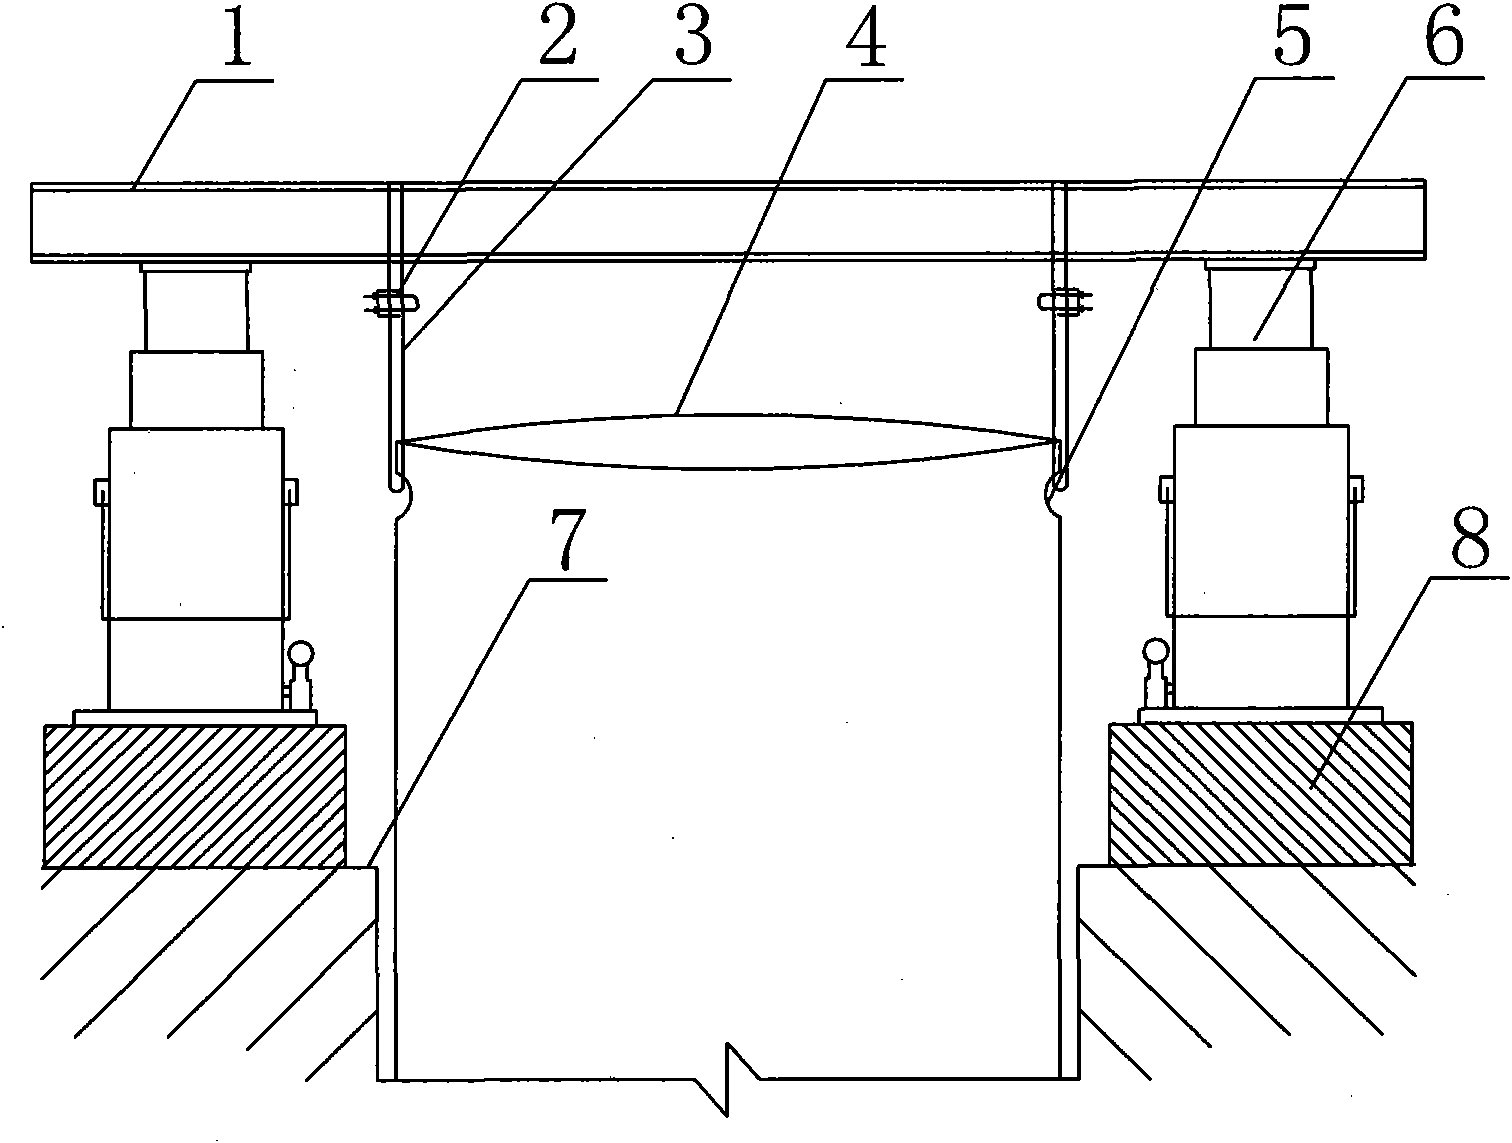 Method for jacking steel casting of bored pile by using jacks